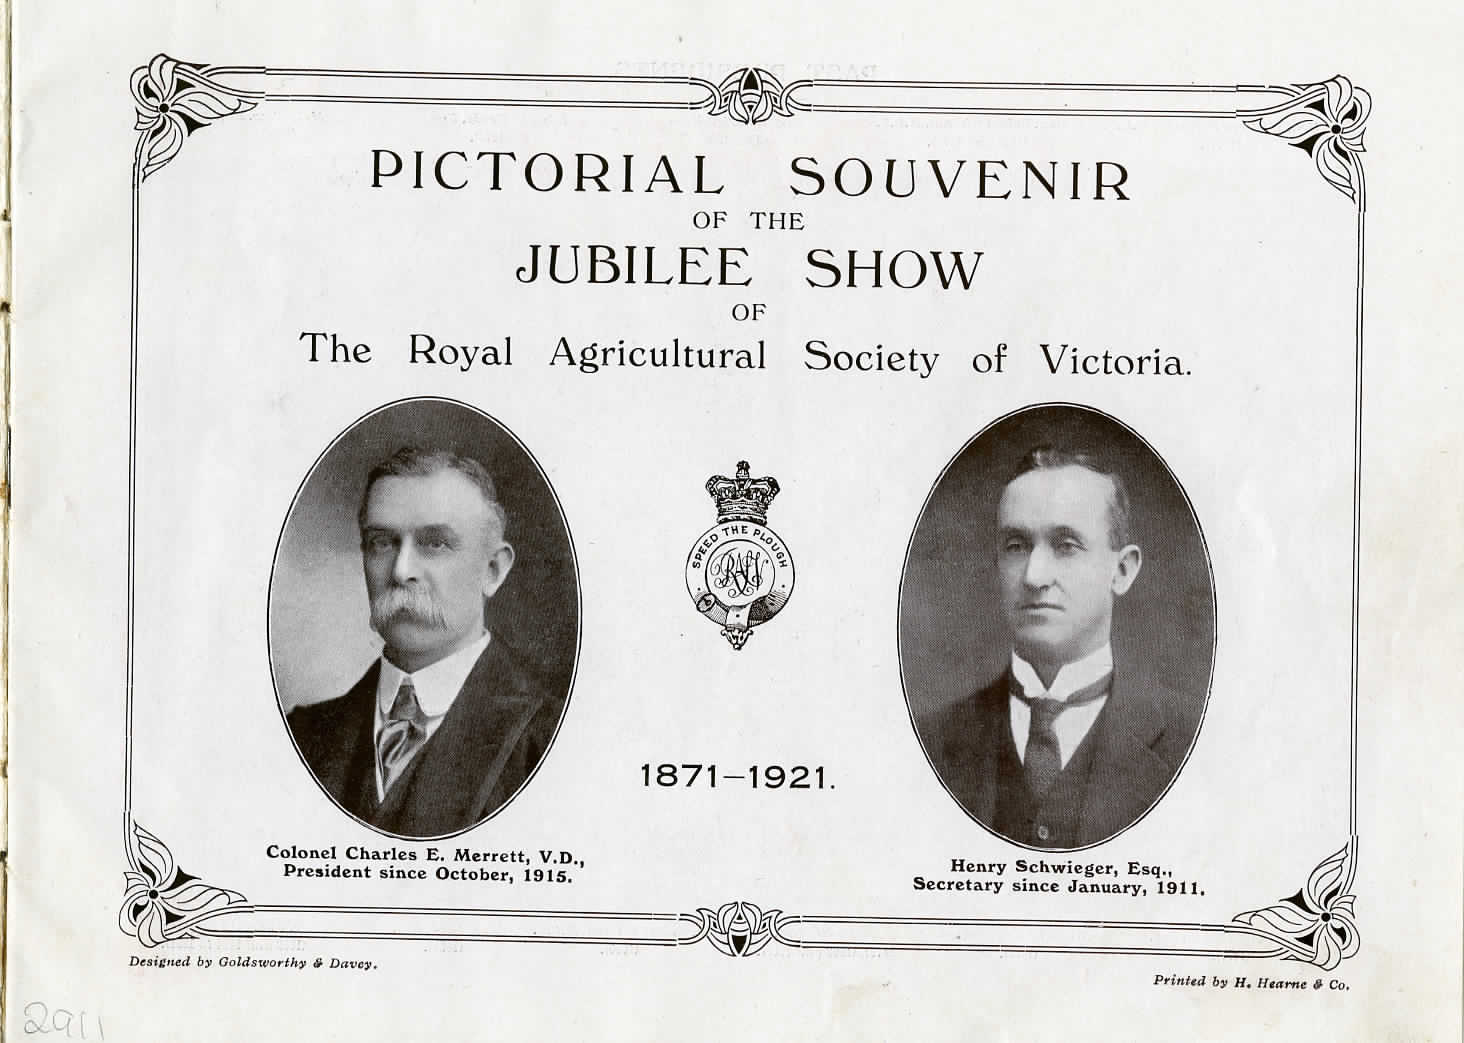 Mr Henry Schwieger pictured in the Royal Agricultural Society of Victoria Jubilee Show Pictorial Souvenir Booklet, 1921. Image Source: Melbourne Royal Heritage Collection 2911.